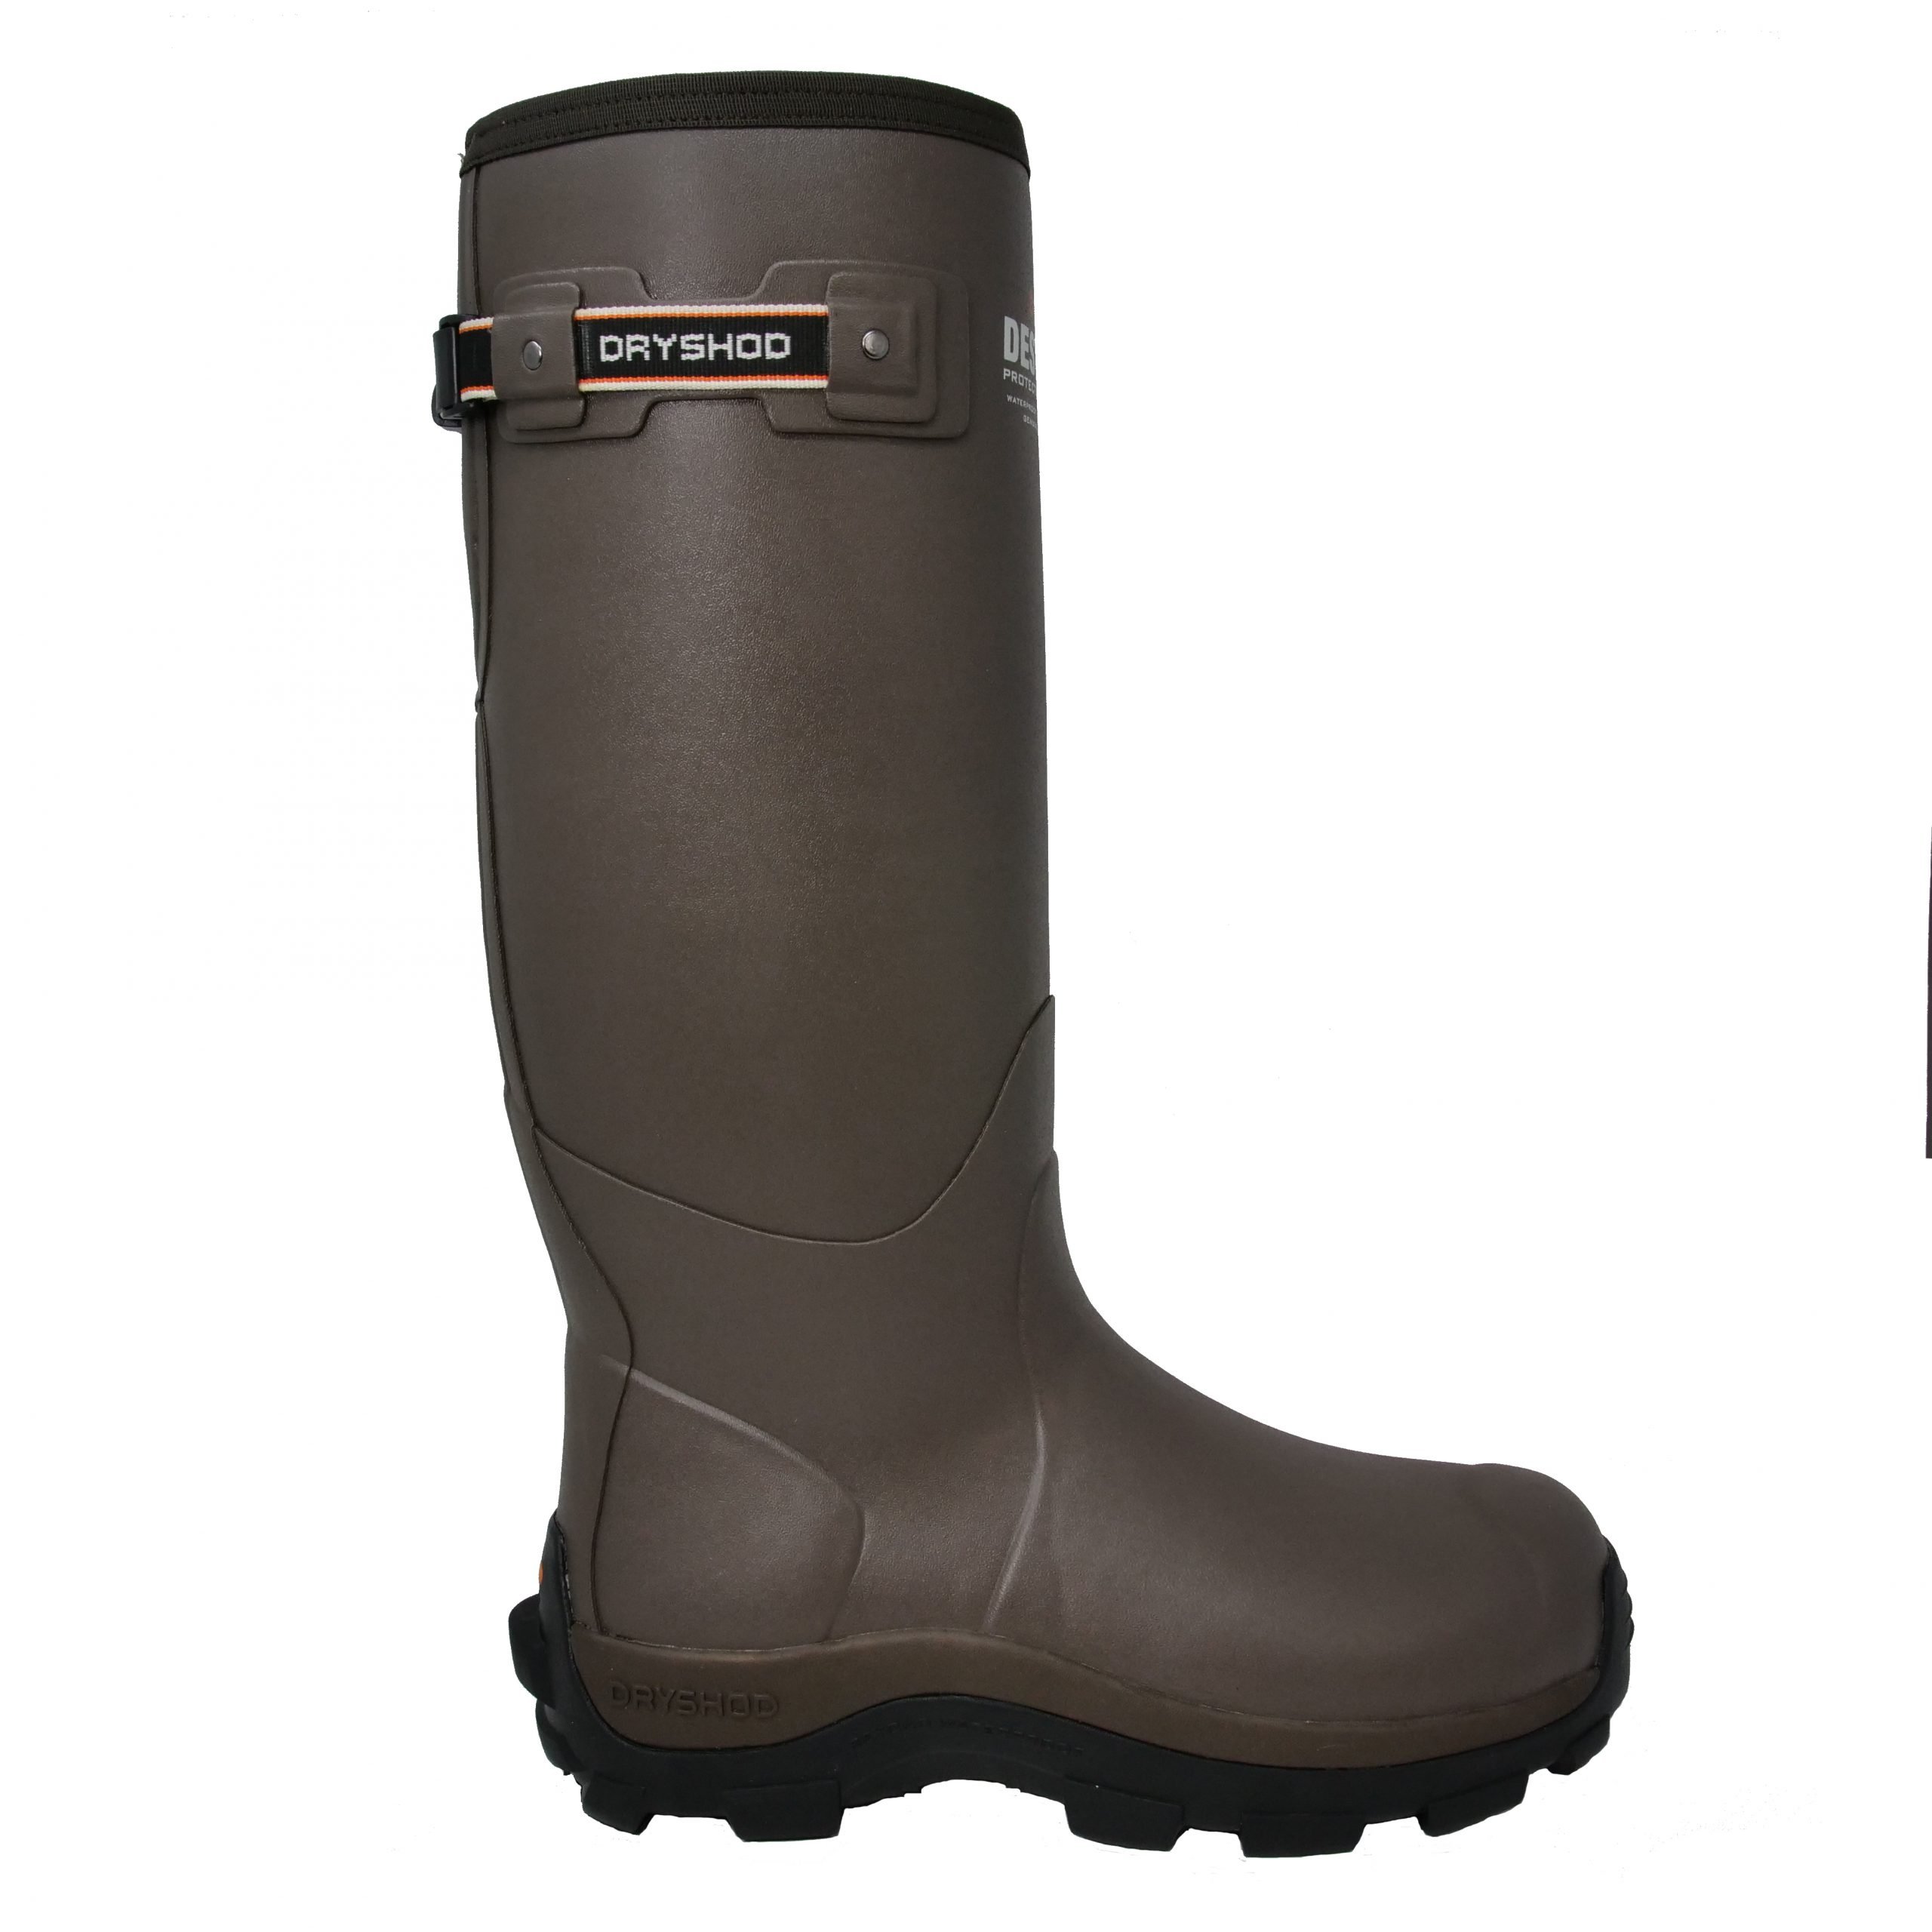 Dungho Max Gusset – Dryshod Waterproof Boots